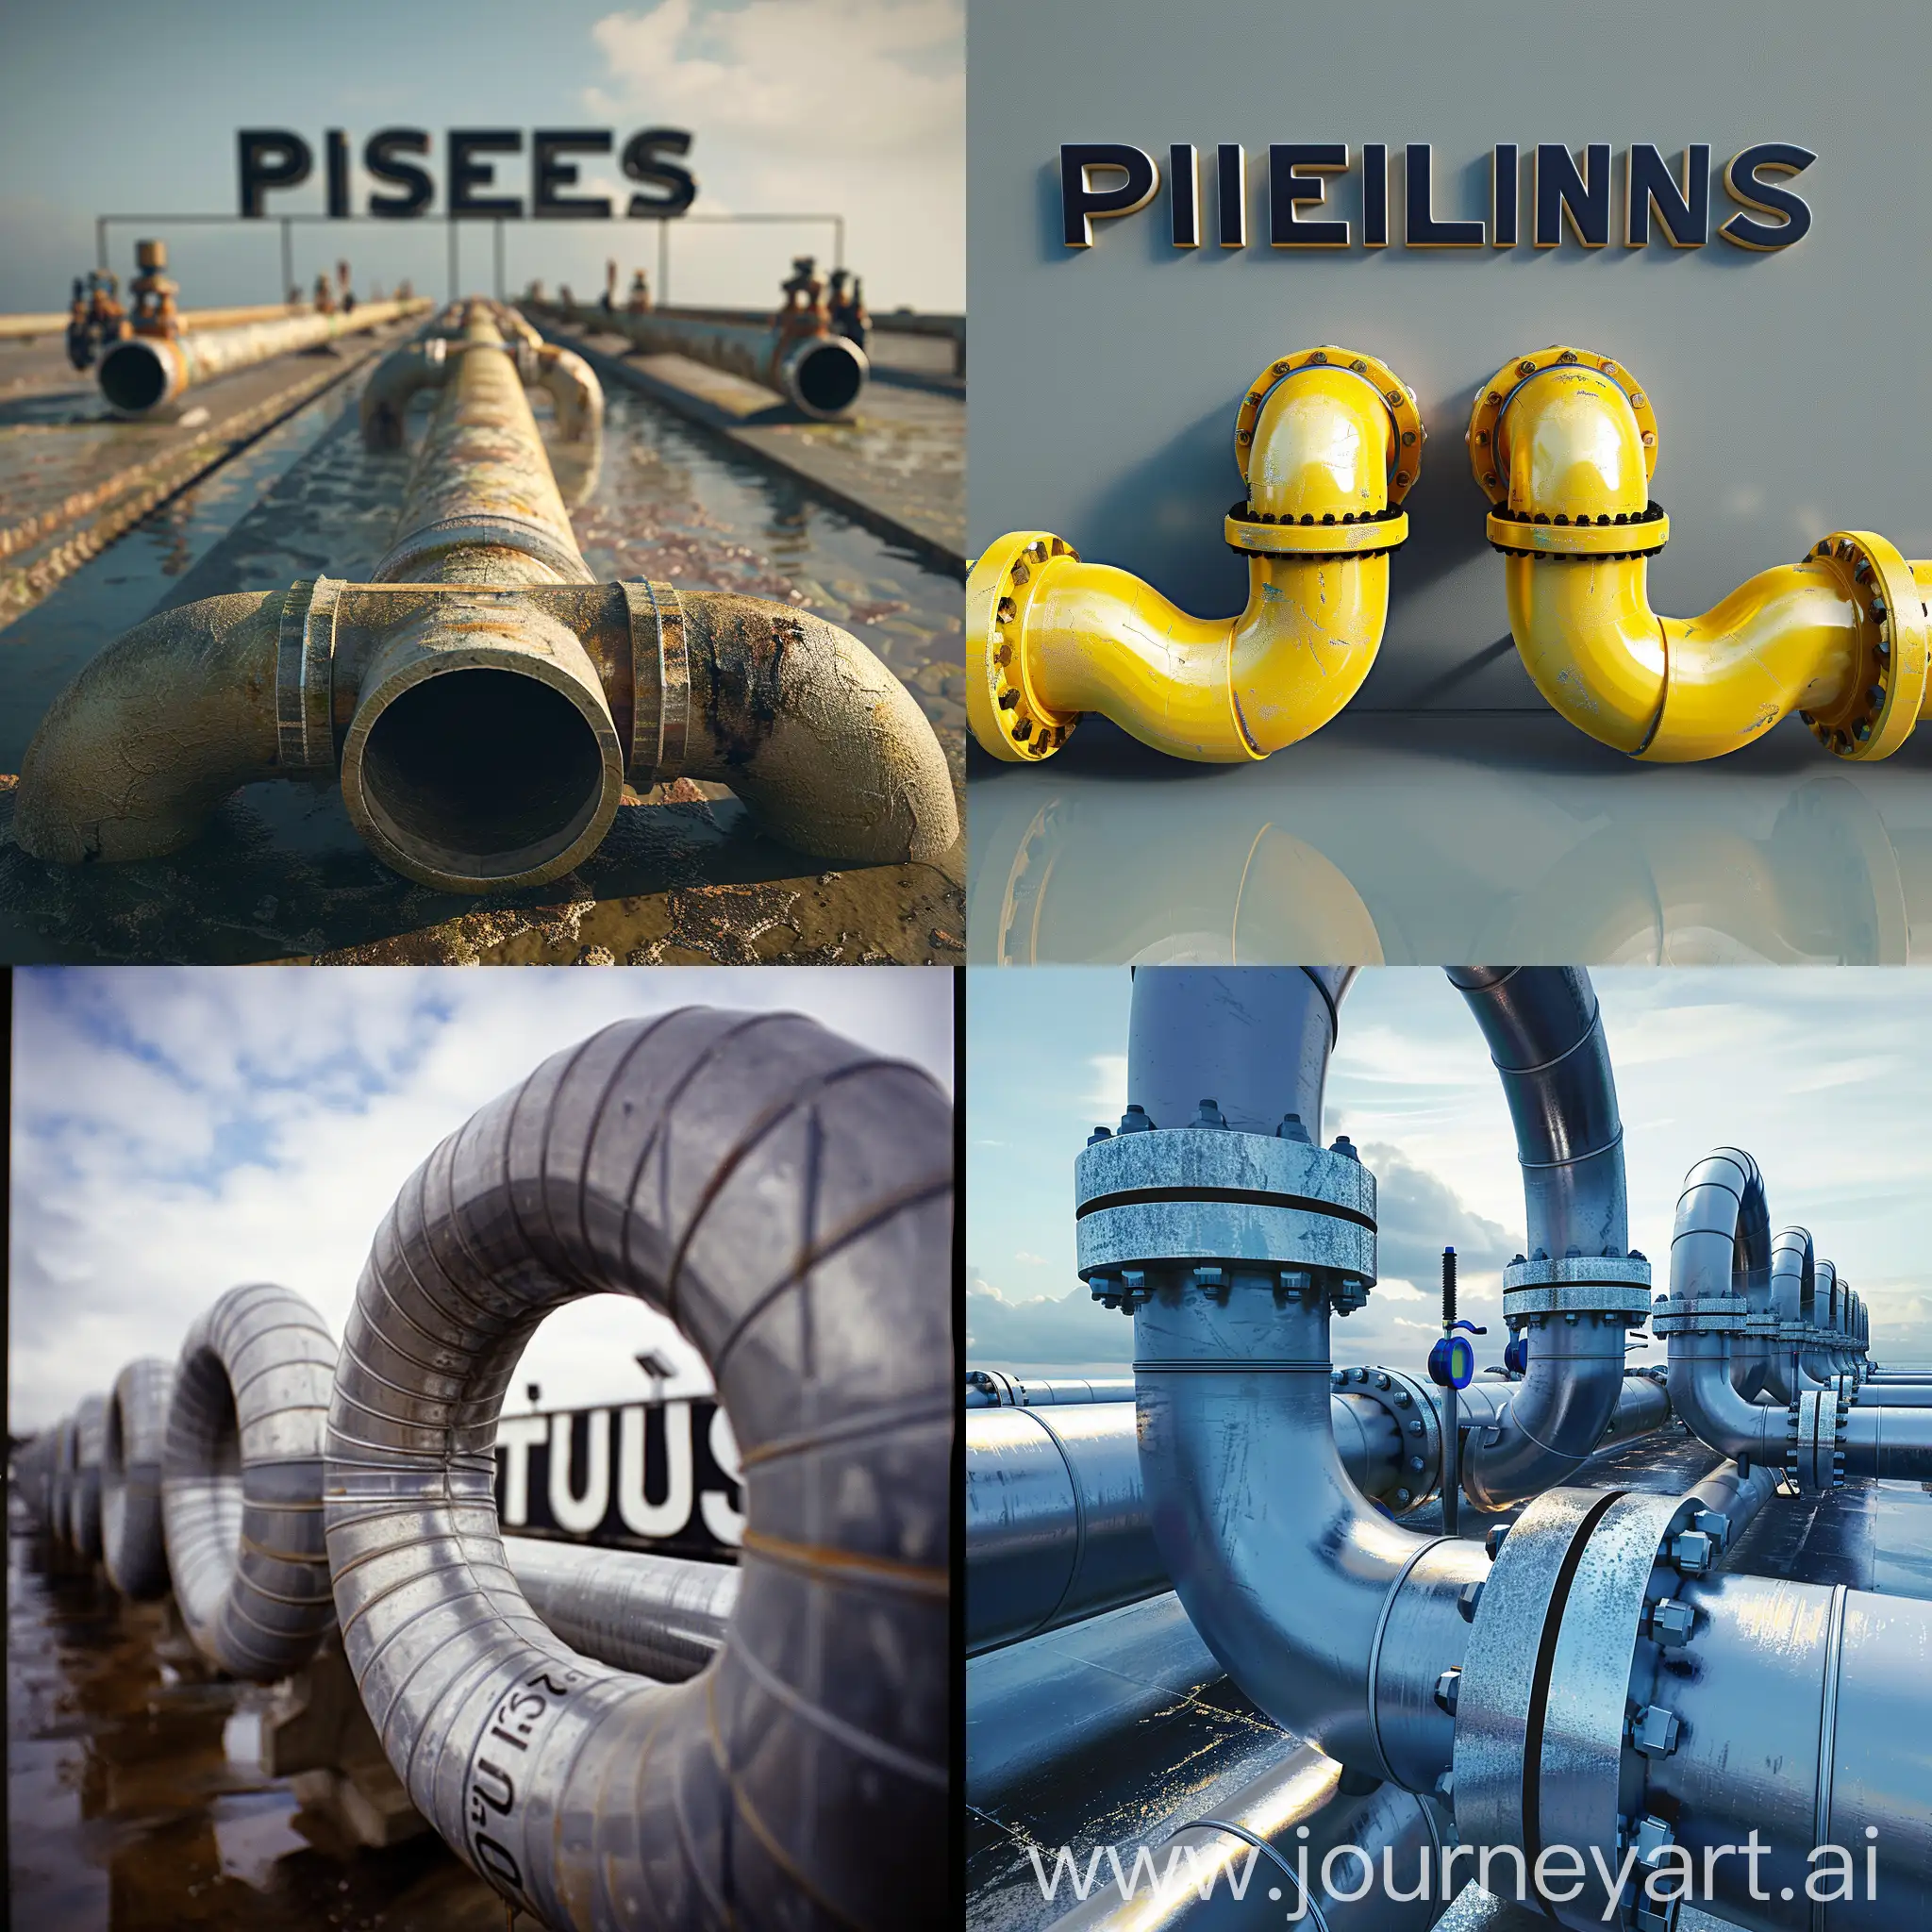 Pipeline-Construction-Workers-Installing-Pipes-on-Site